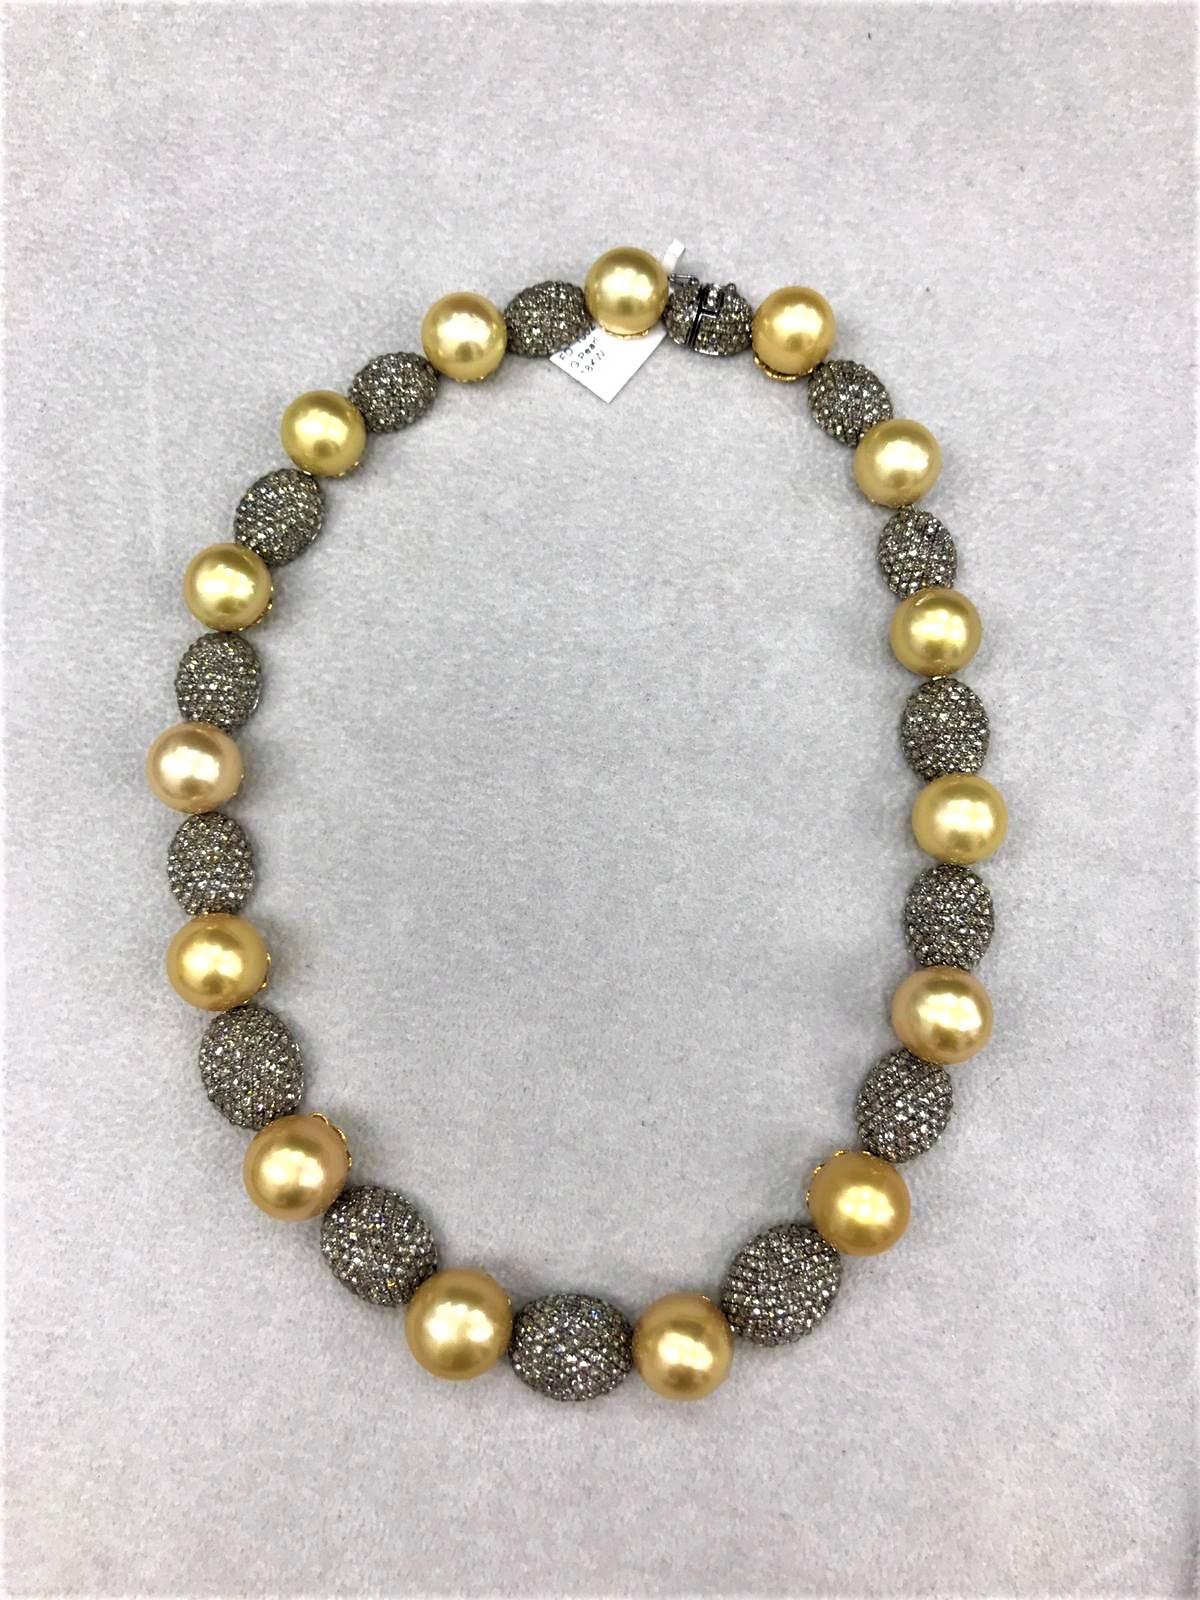 The Following Item we are offering is this Beautiful Important 18KT Gold Magnificent Rare Golden South Sea Pearl and Fancy Diamond Necklace. Necklace is comprised of 15 Beautiful Magnificent High Luster Large South Sea Golden Pearls that gives off a